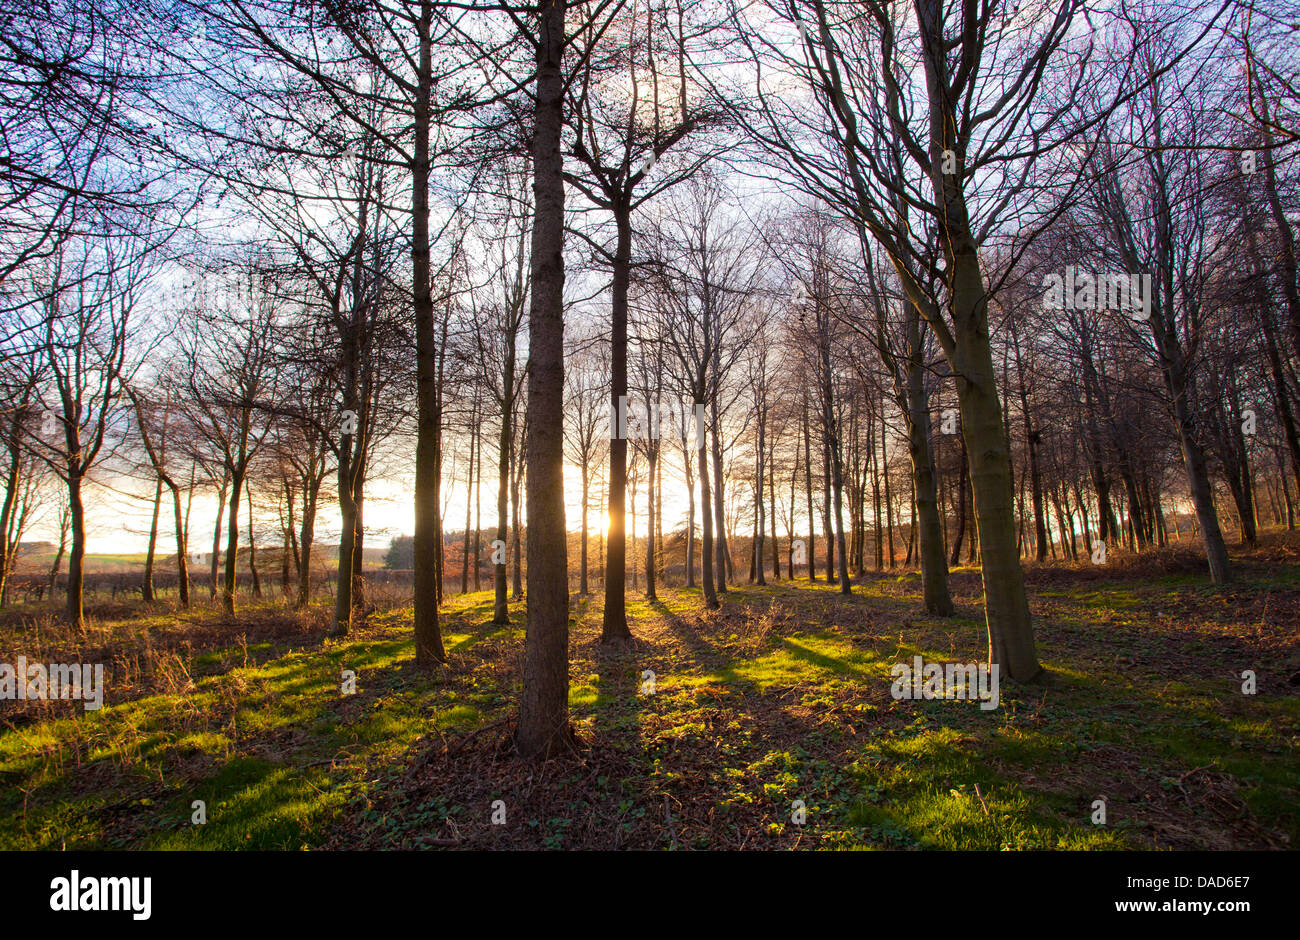 Winter woodland backlit by the late afternoon sun, Longhoughton, near Alnwick, Northumberland, England, United Kingdom, Europe Stock Photo